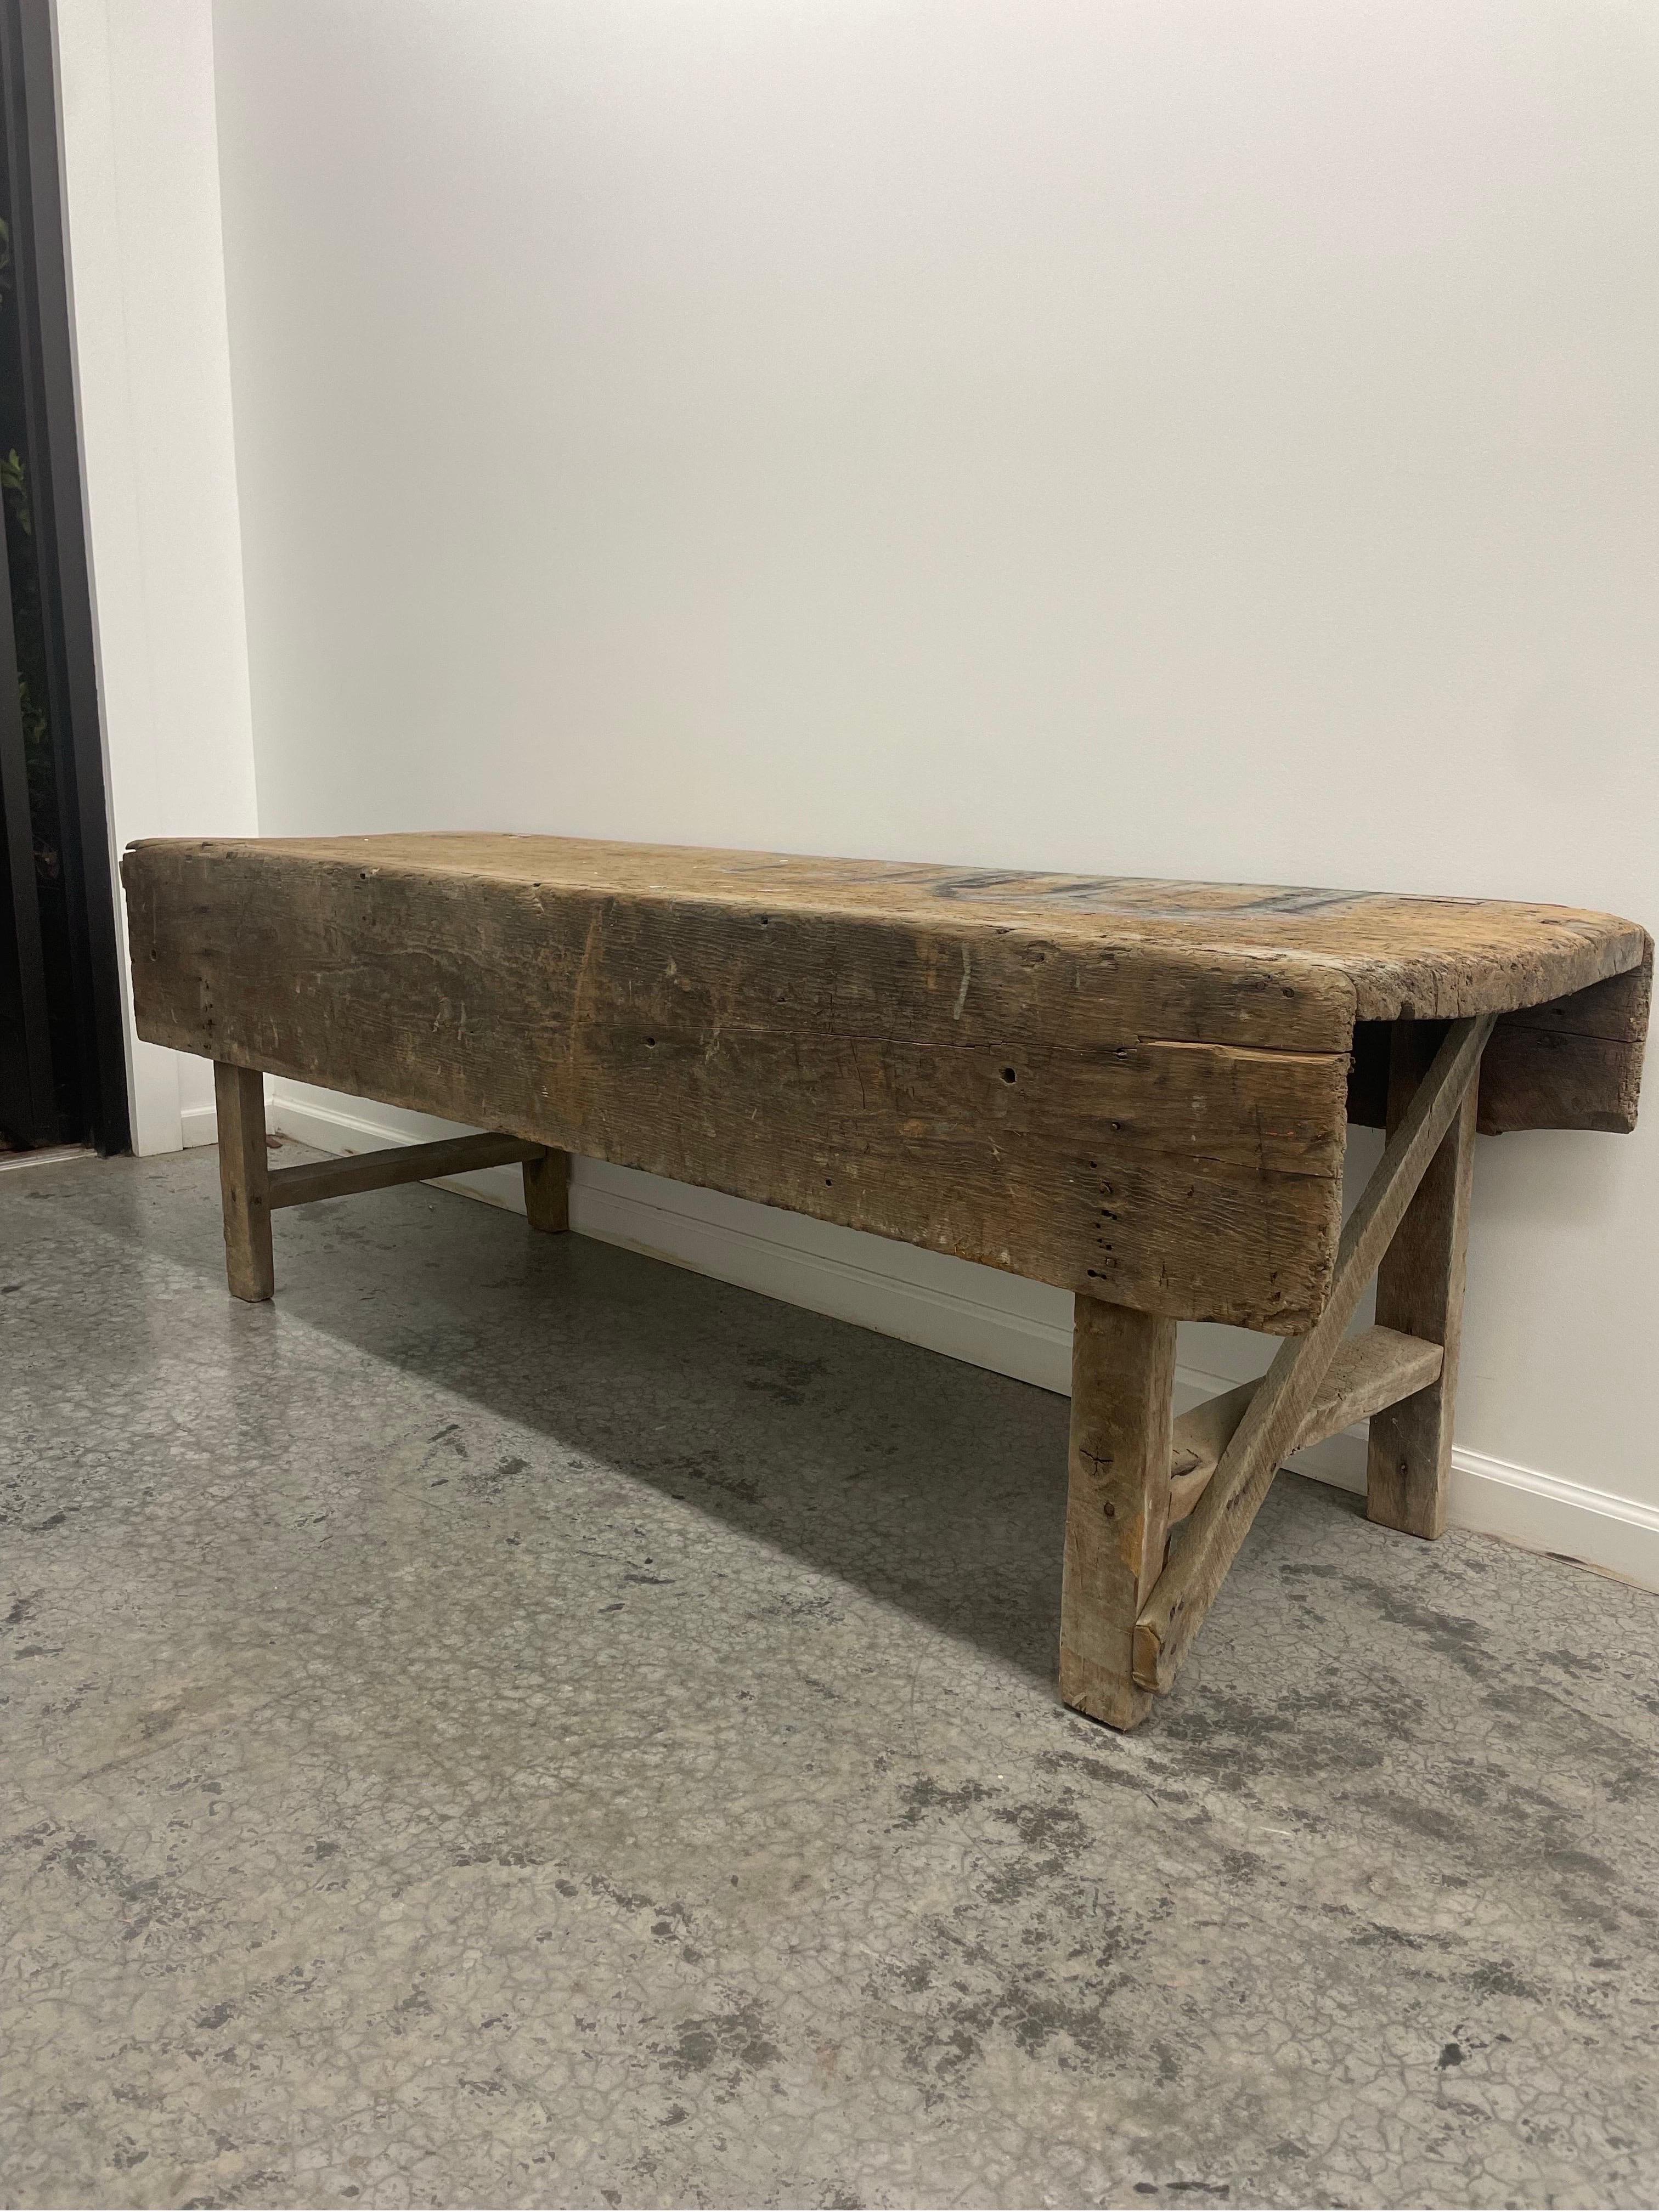 Large Brutalist carpenters bench or work table with patina due to age in all the right places. Past History as Mortuary Table Circa 1800's.

This is quite simply one of the most interesting pieces I have ever had in. 

This came a private